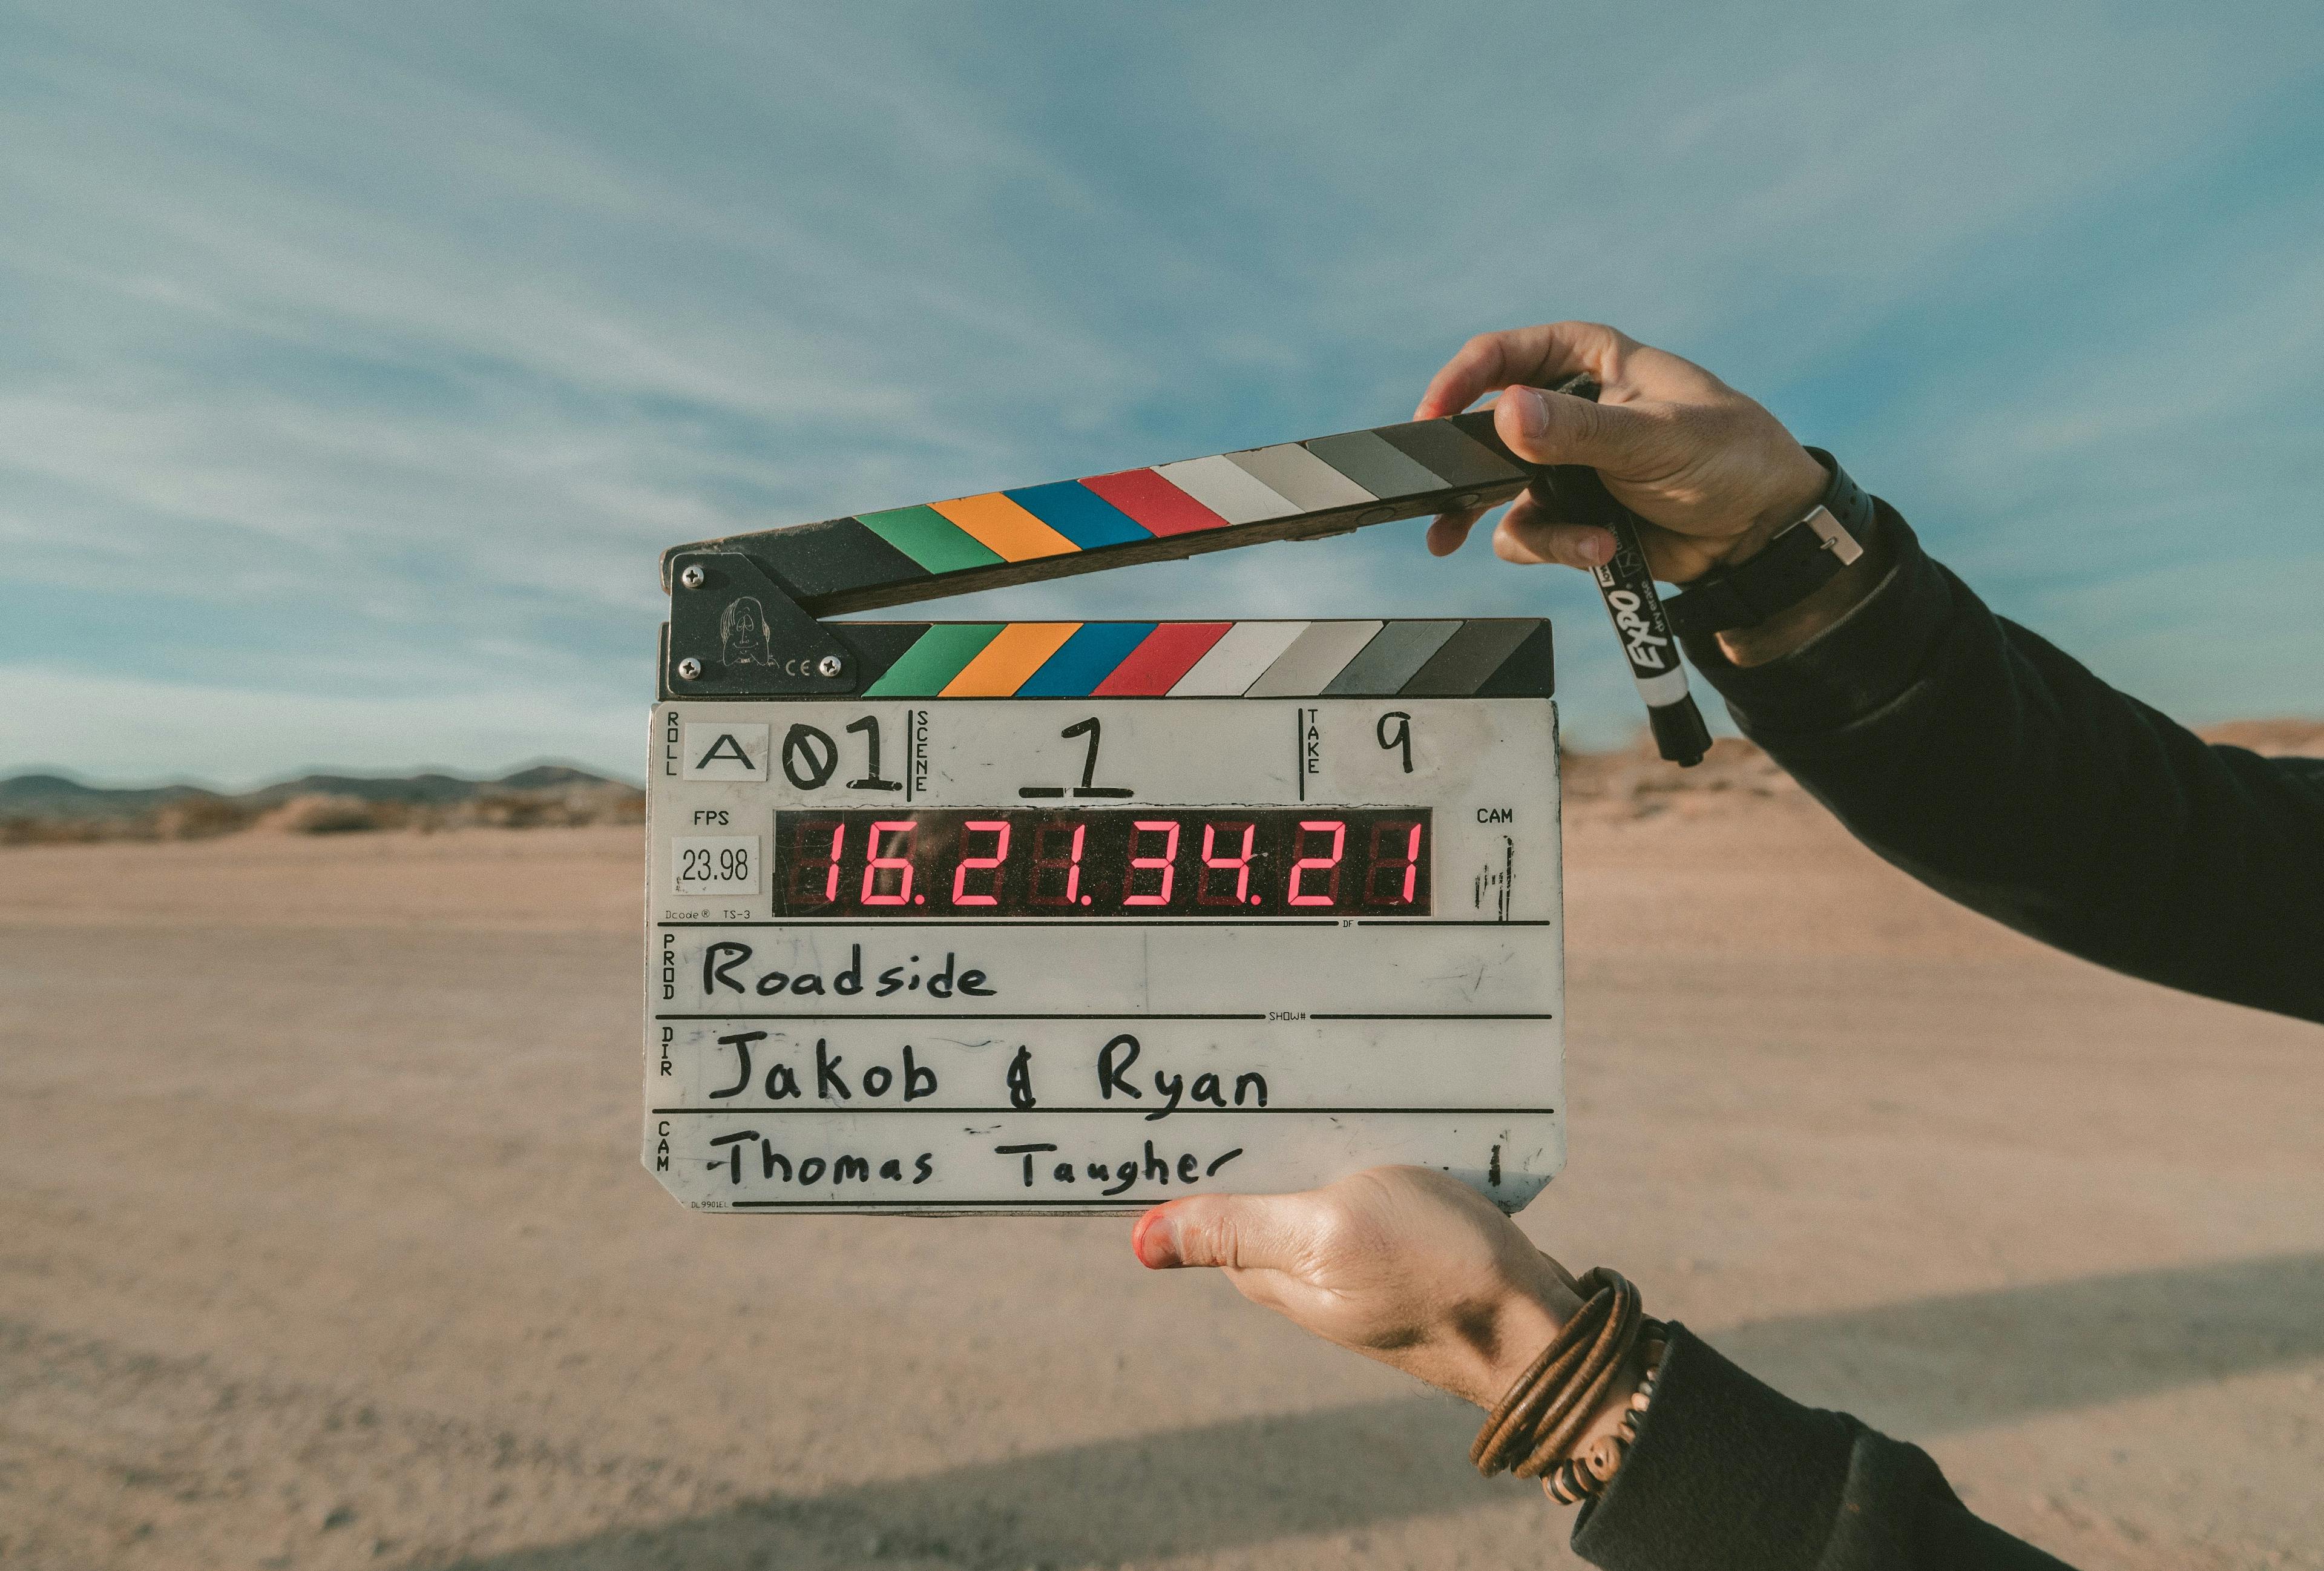 filming a movie in the desert, hands